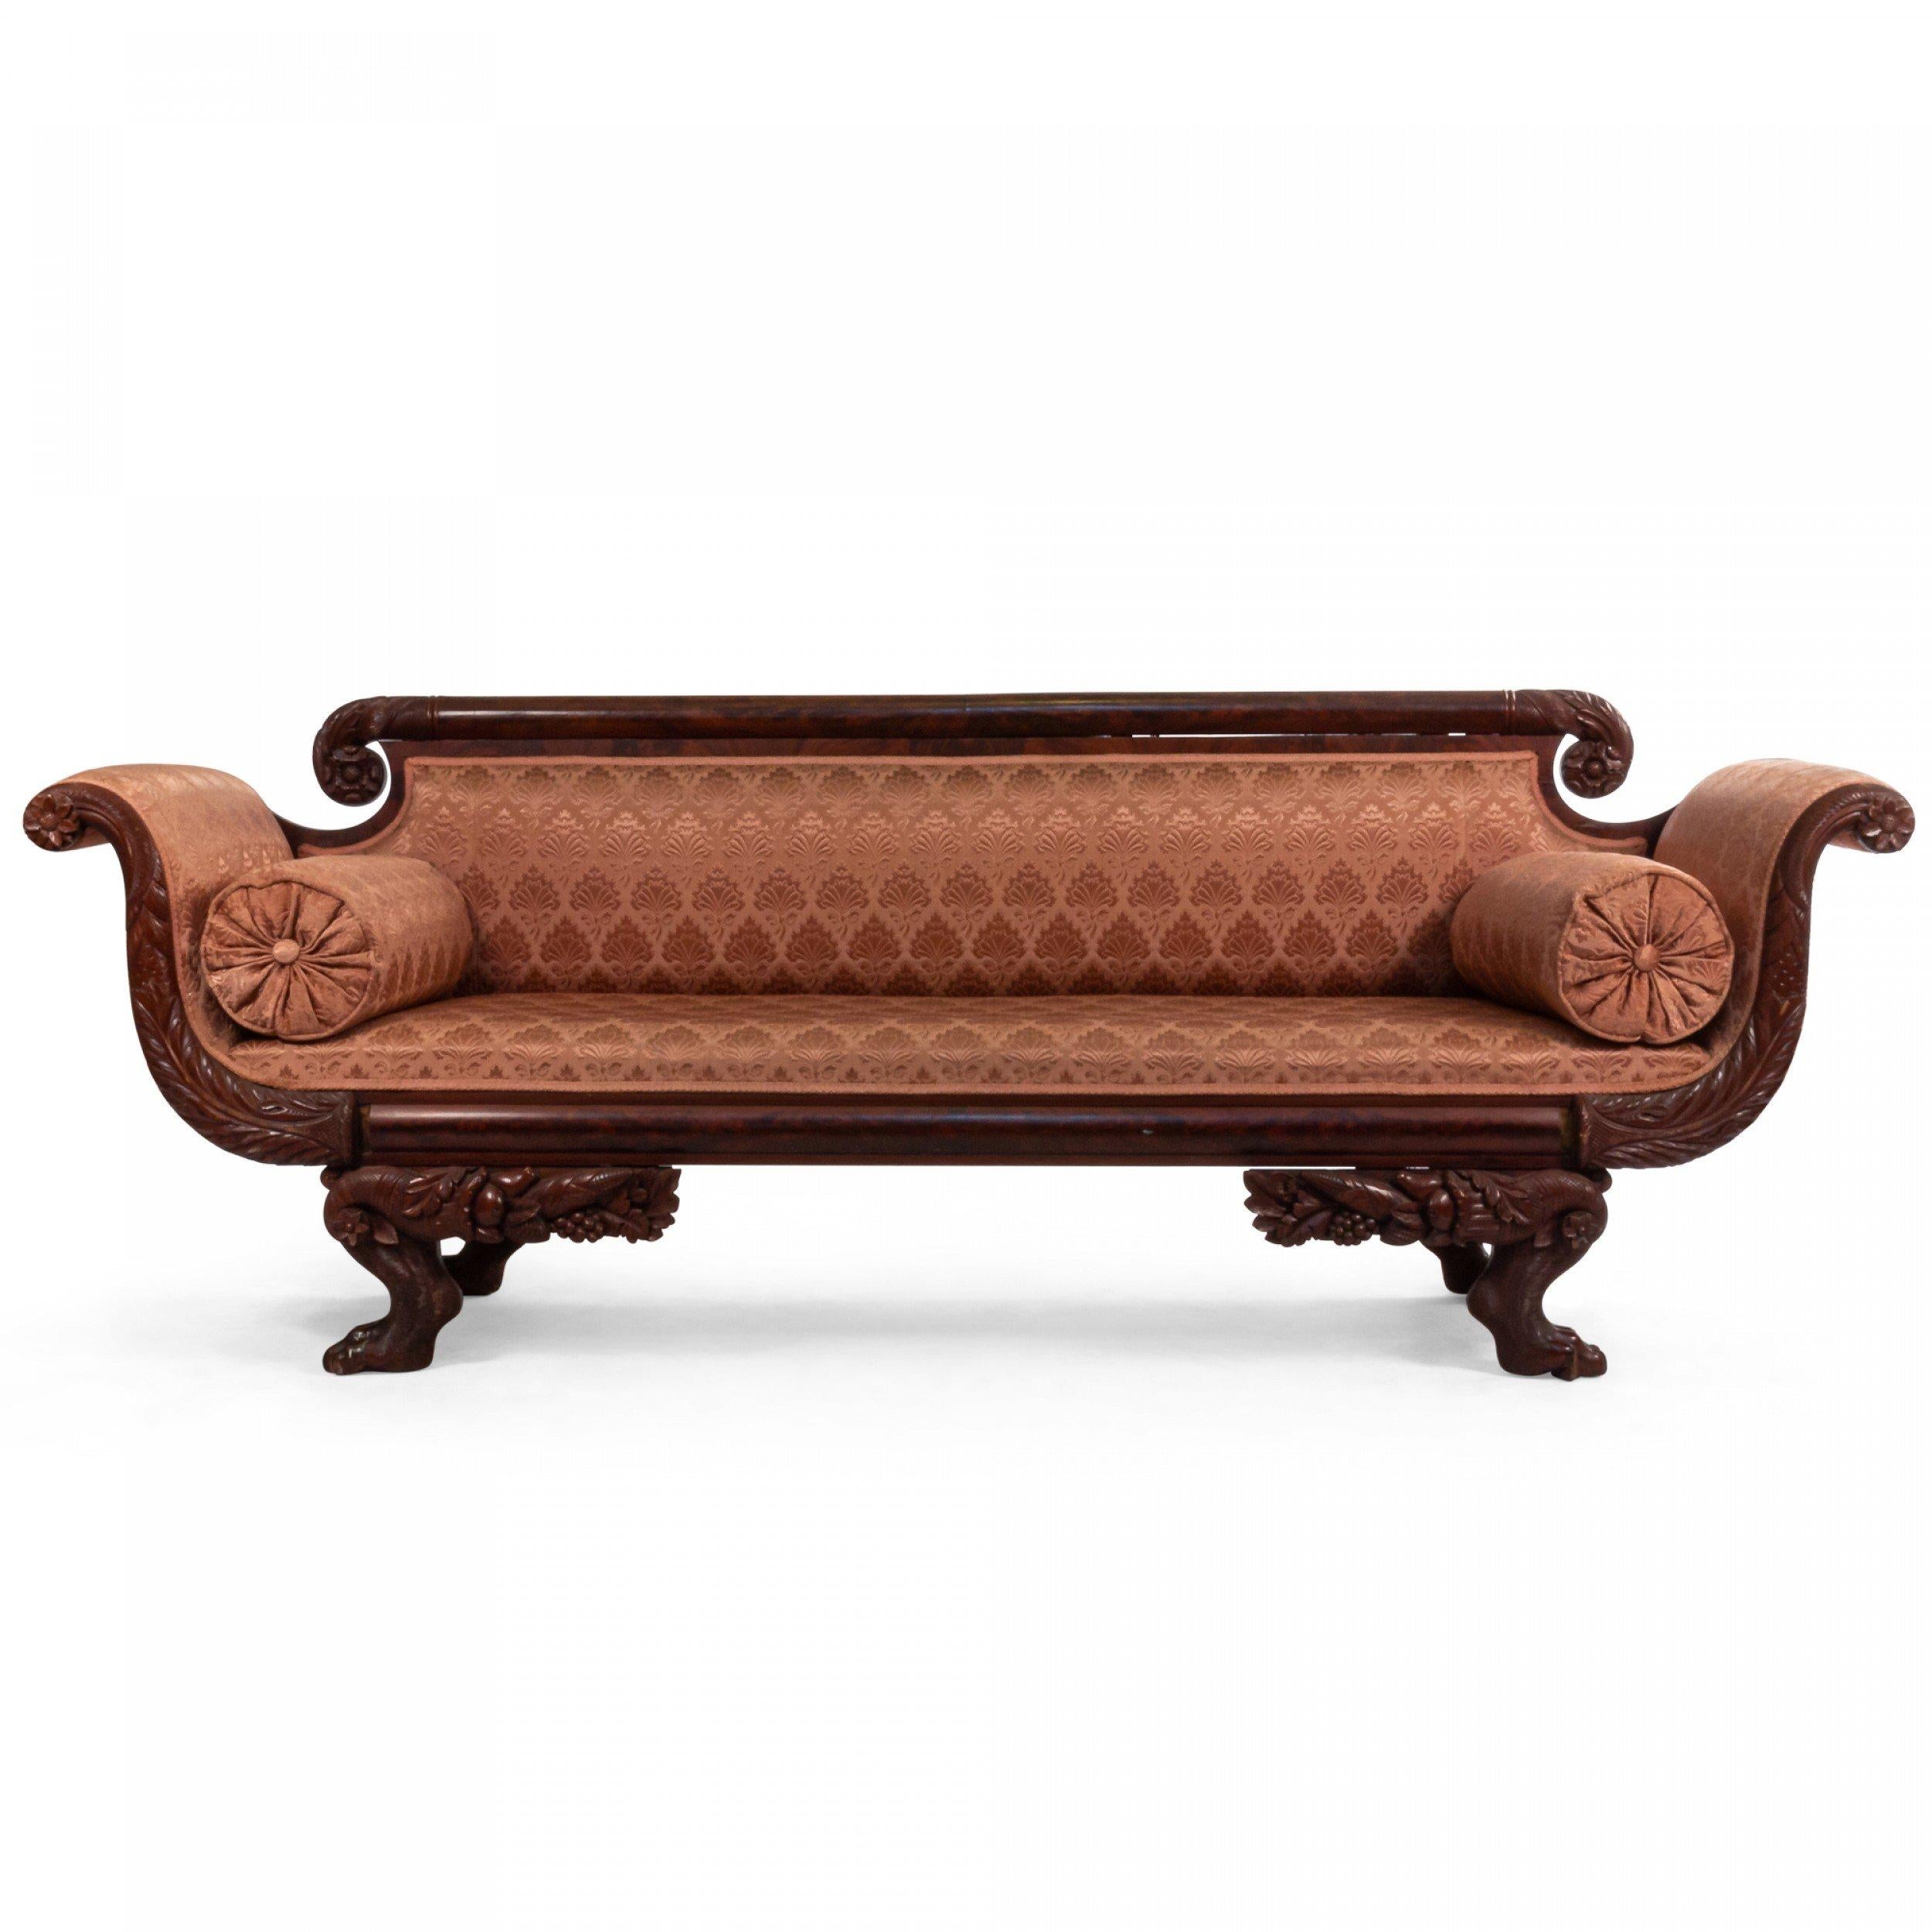 American Empire Style Mahogany Sofa with Peach Upholstery For Sale 1